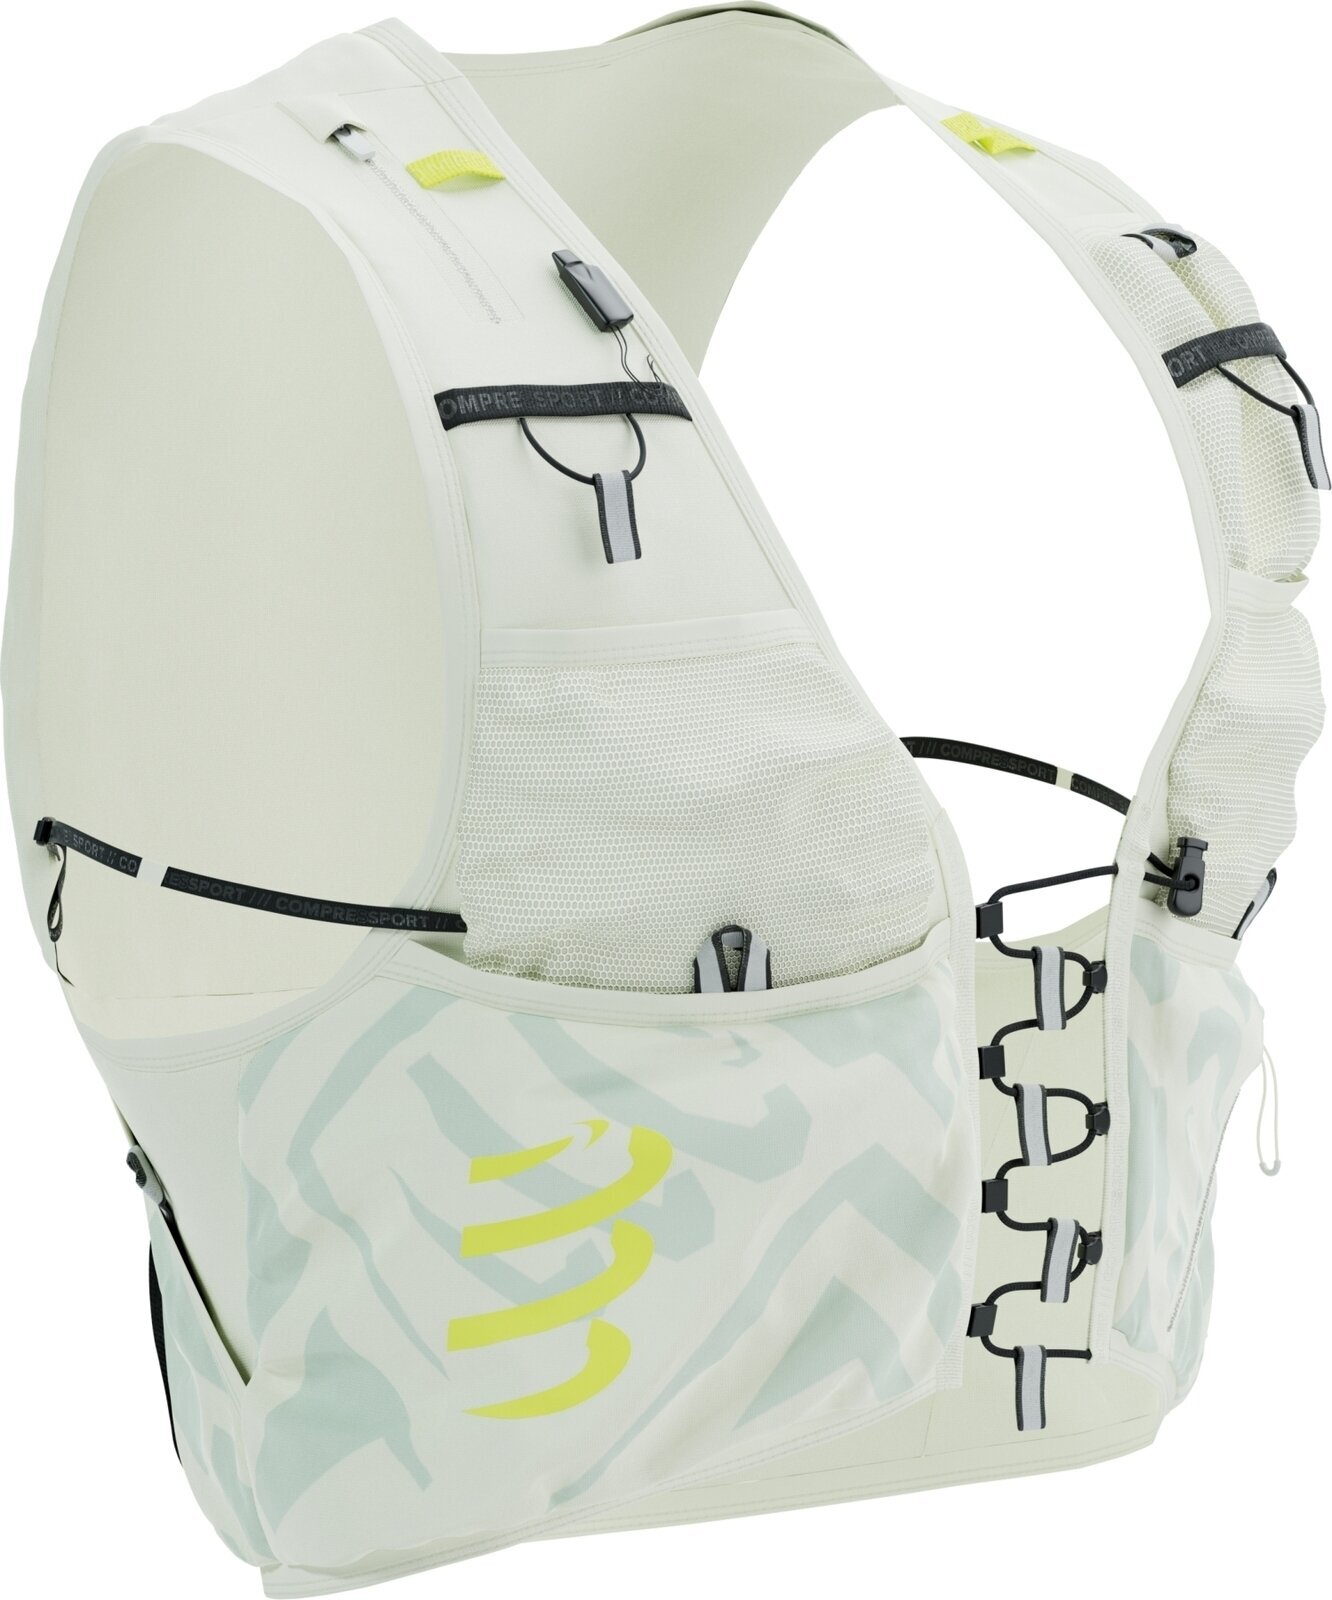 Running backpack Compressport UltRun S Pack Evo 10 Sugar Swizzle/Ice Flow/Safety Yellow S Running backpack